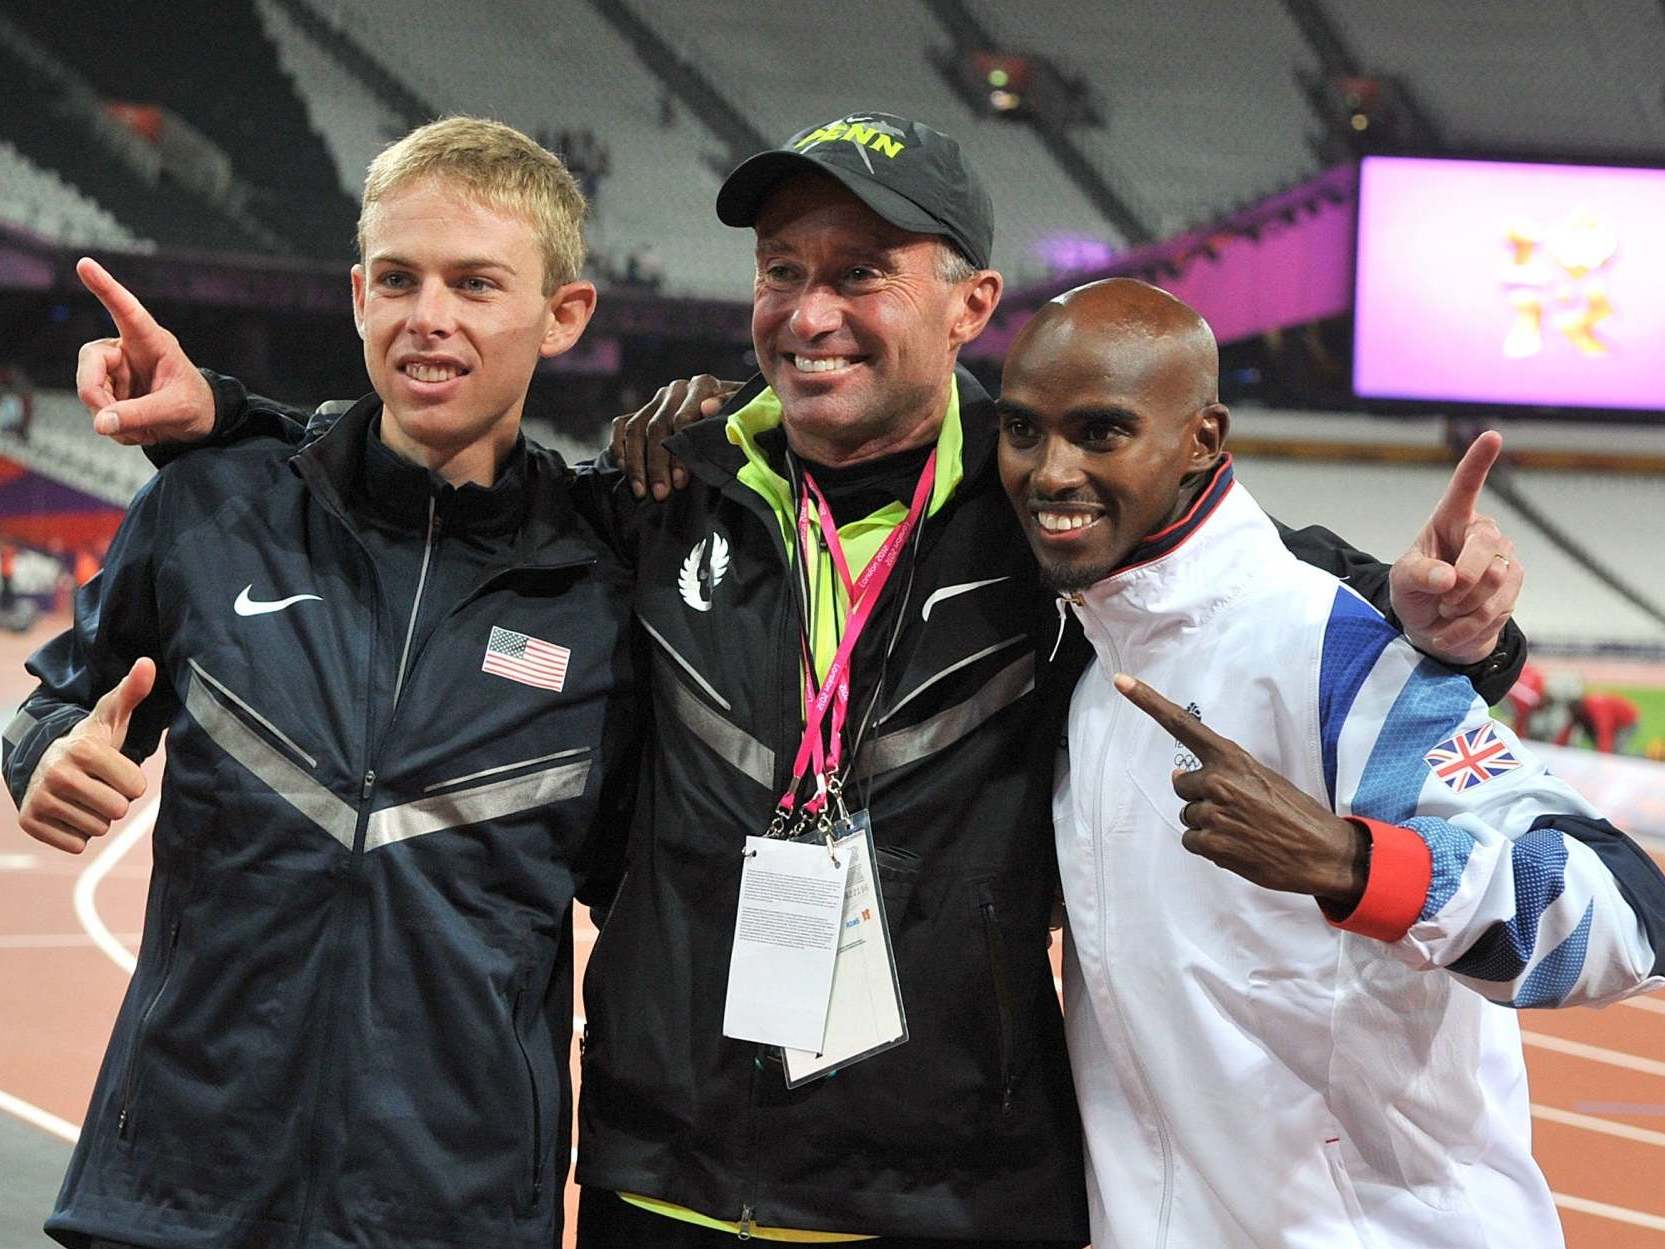 Sir Mo Farah trained with Alberto Salazar between 2011 and 2017